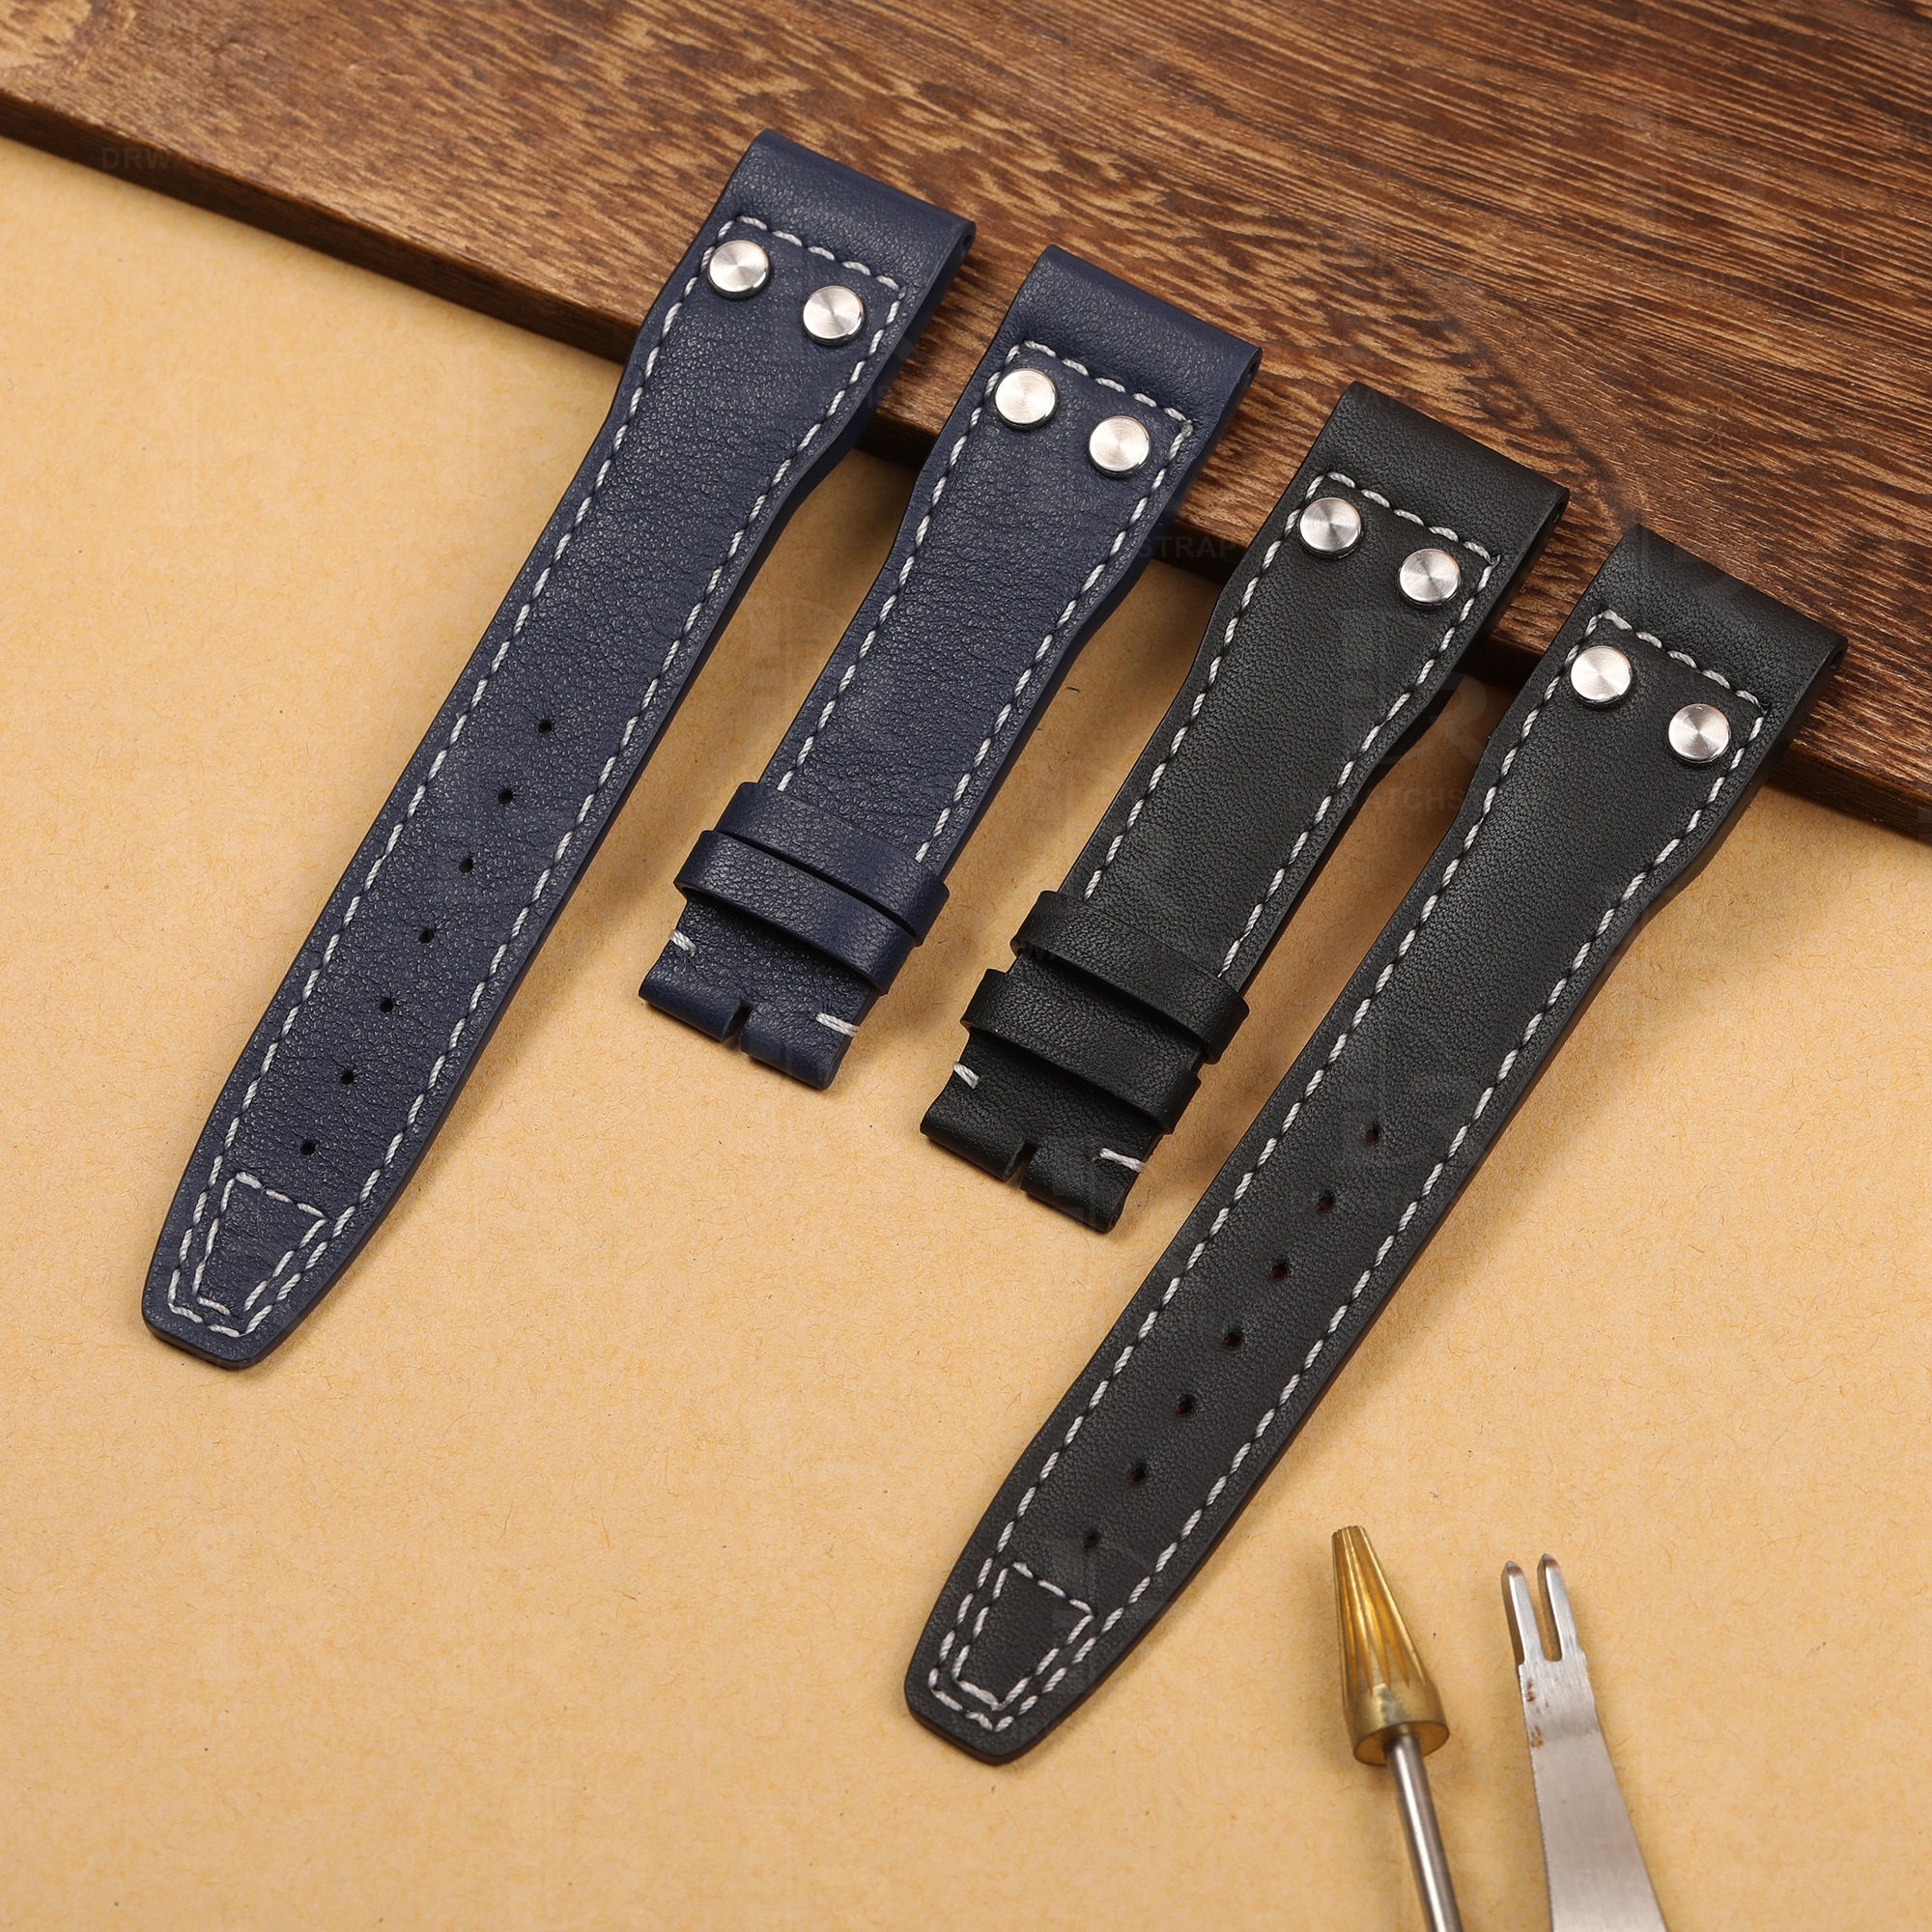 Buy Custom IWC Big Pilot calfskin leather watch band strap with rivets 21mm 22mm Handmade watchstraps